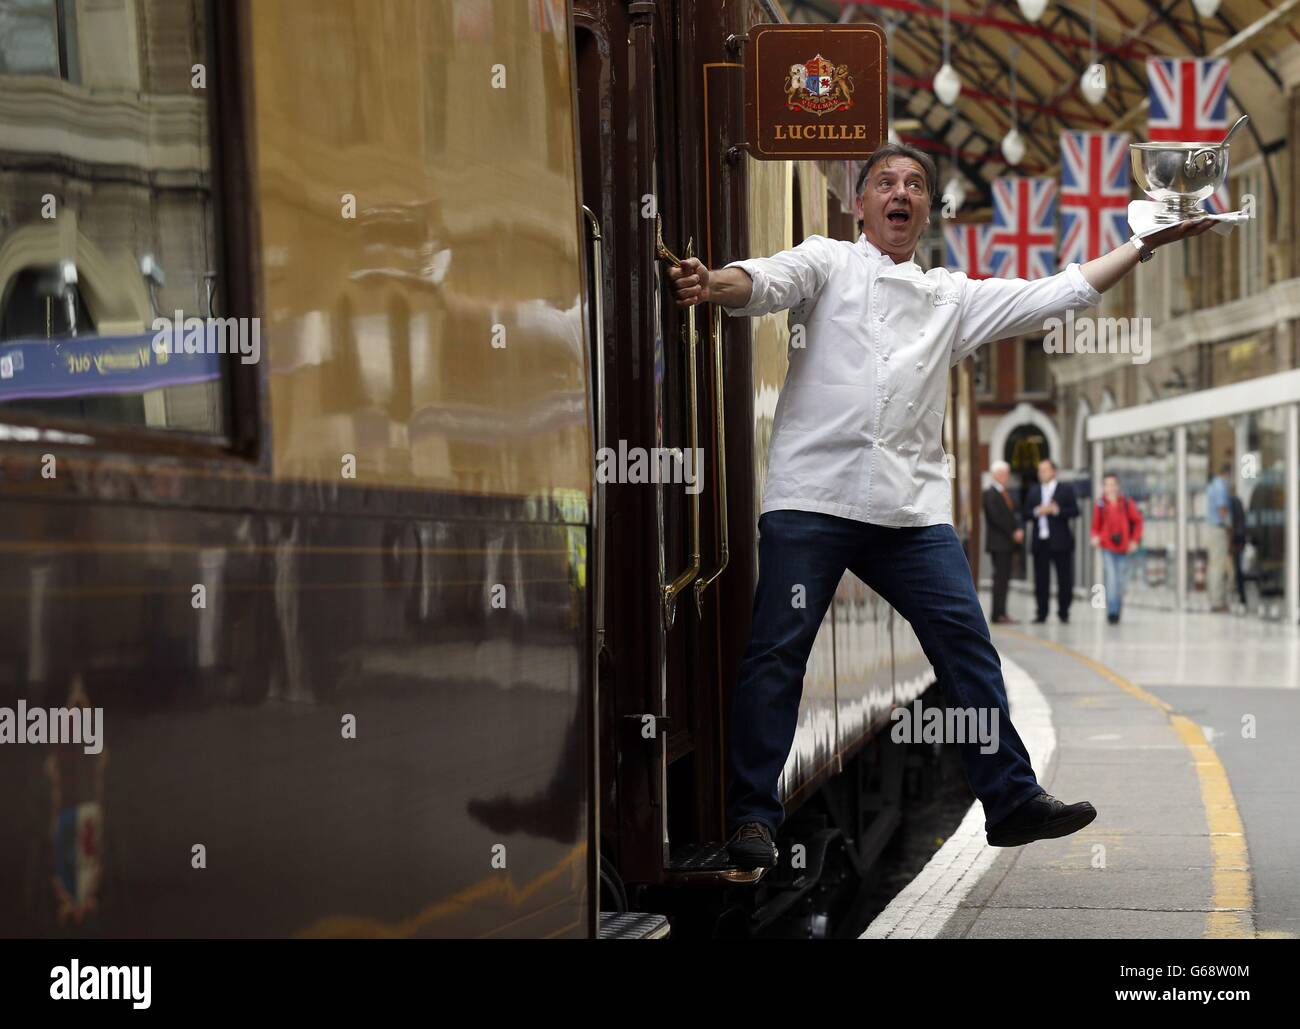 Michelin starred chef Raymond Blanc attends a photocall beside the British Pullman, sister train to the Venice Simplon-Orient-Express, at London Victoria Station to promote a series of 'pop-up' dinners to be hosted by renowned chefs on the train during 2013 and 2014. Stock Photo